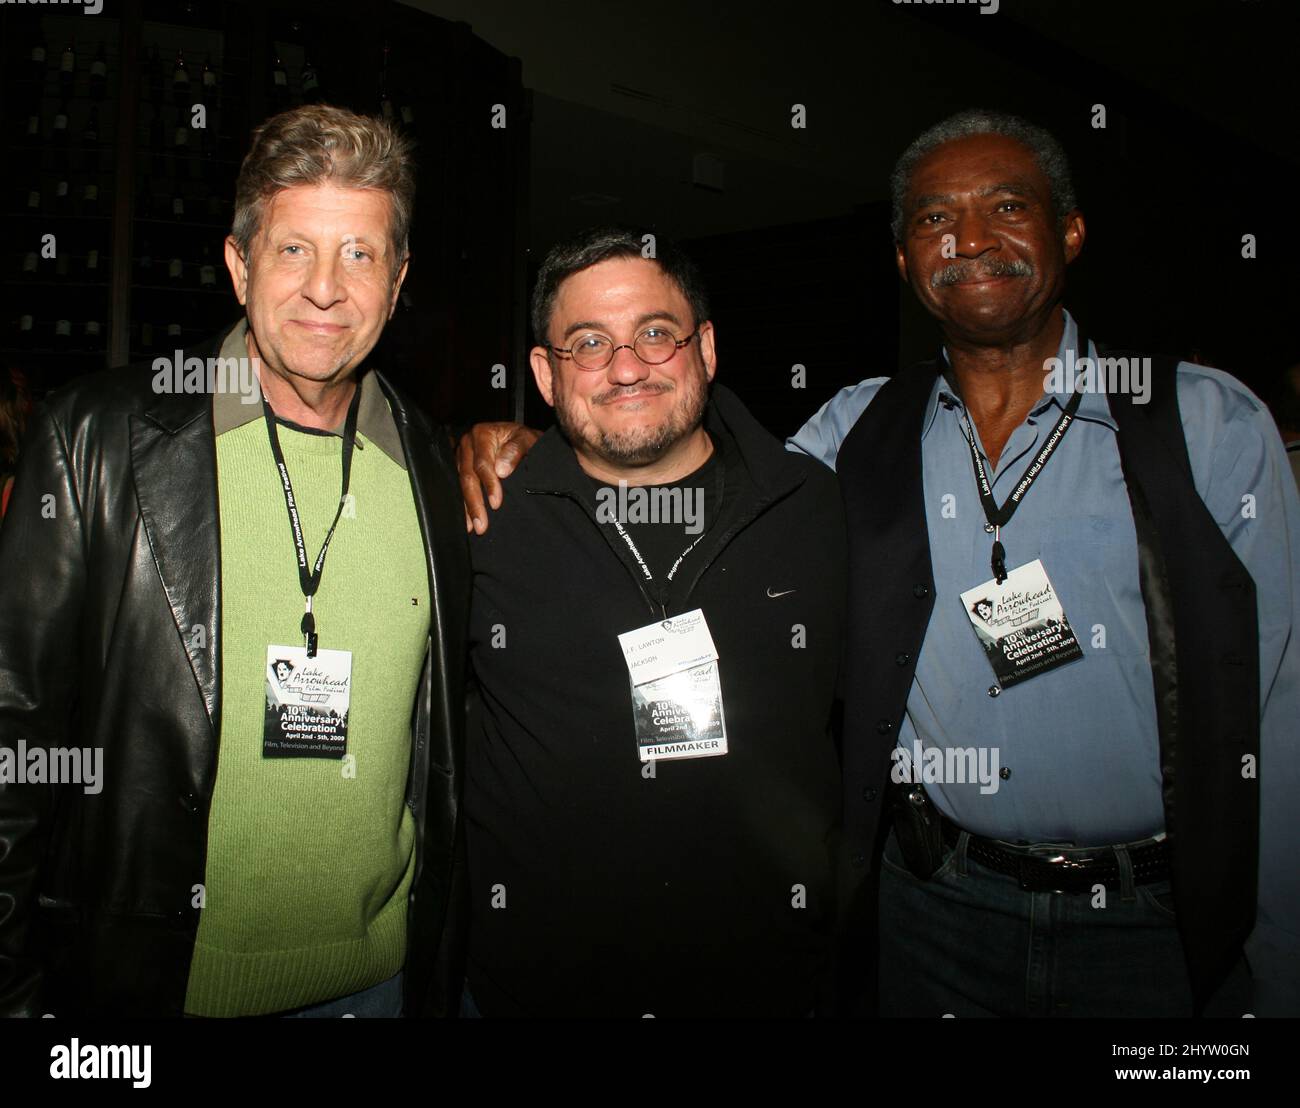 (left to right) Barry Primus, J.F. Lawton and Charles Robinson at the 10th Anniversary Celebration of the Lake Arrowhead Film Festival held at the Lake Arrowhead Resort. Stock Photo